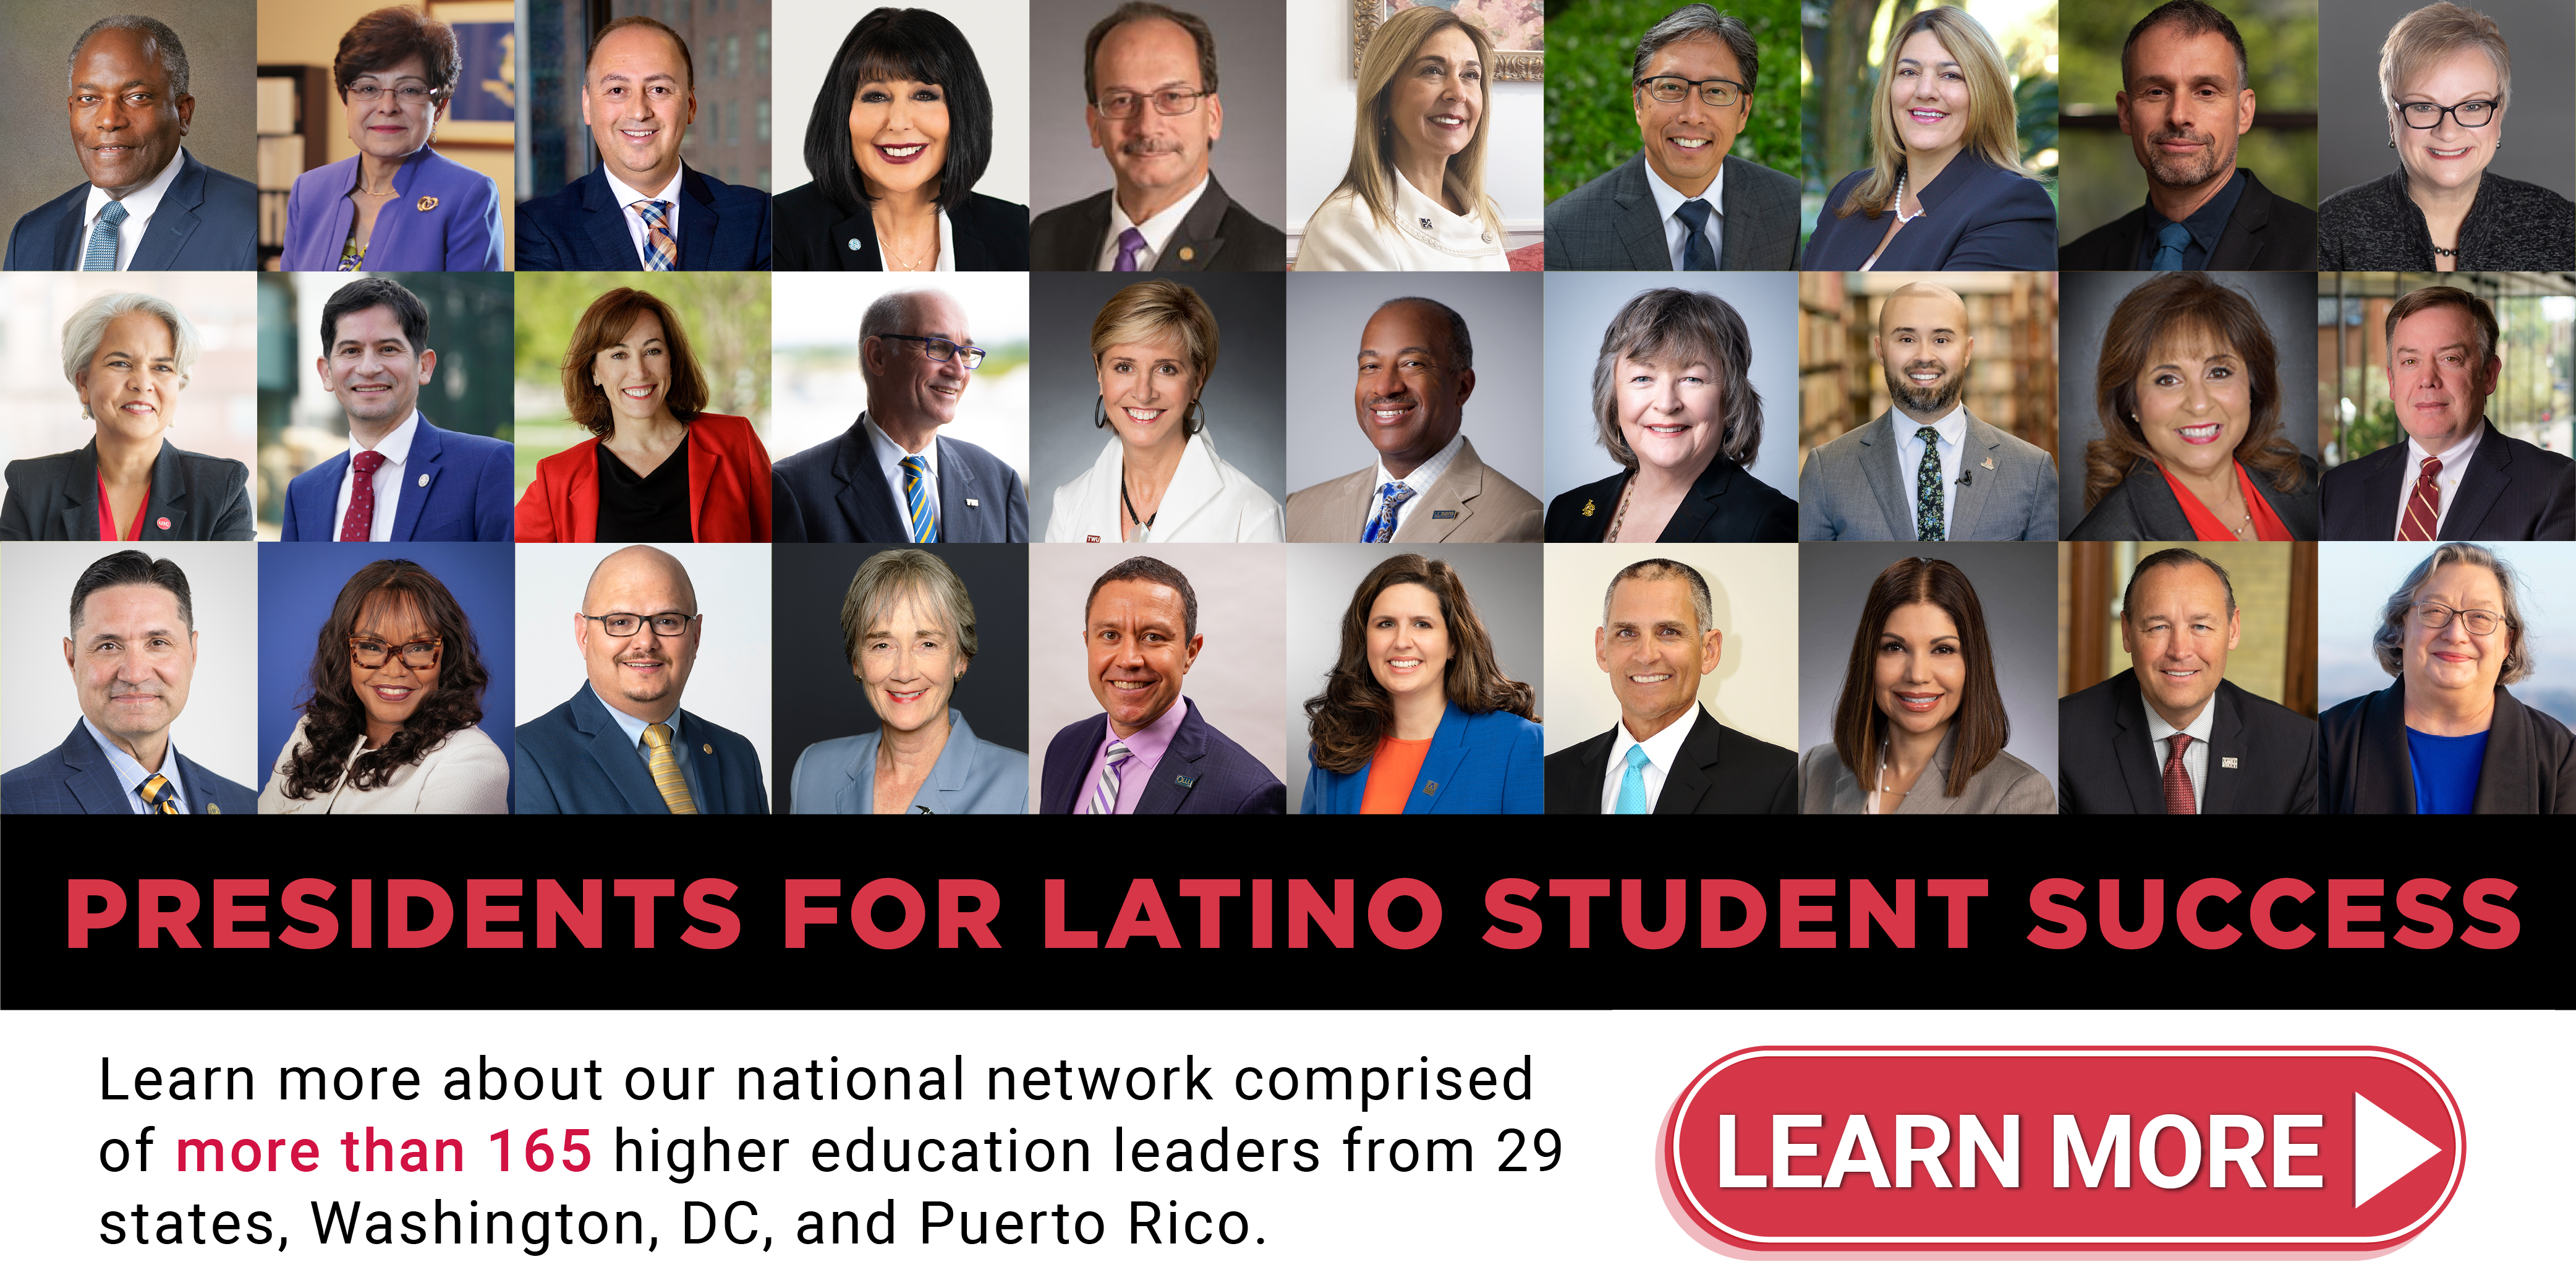 Graphic pop-up featuring presidents from our "Presidents for Latino Student Success" national network comprised of more than 165 higher education leaders from 29 states, Washington, DC, and Puerto Rico. Next to a "Learn More" button.